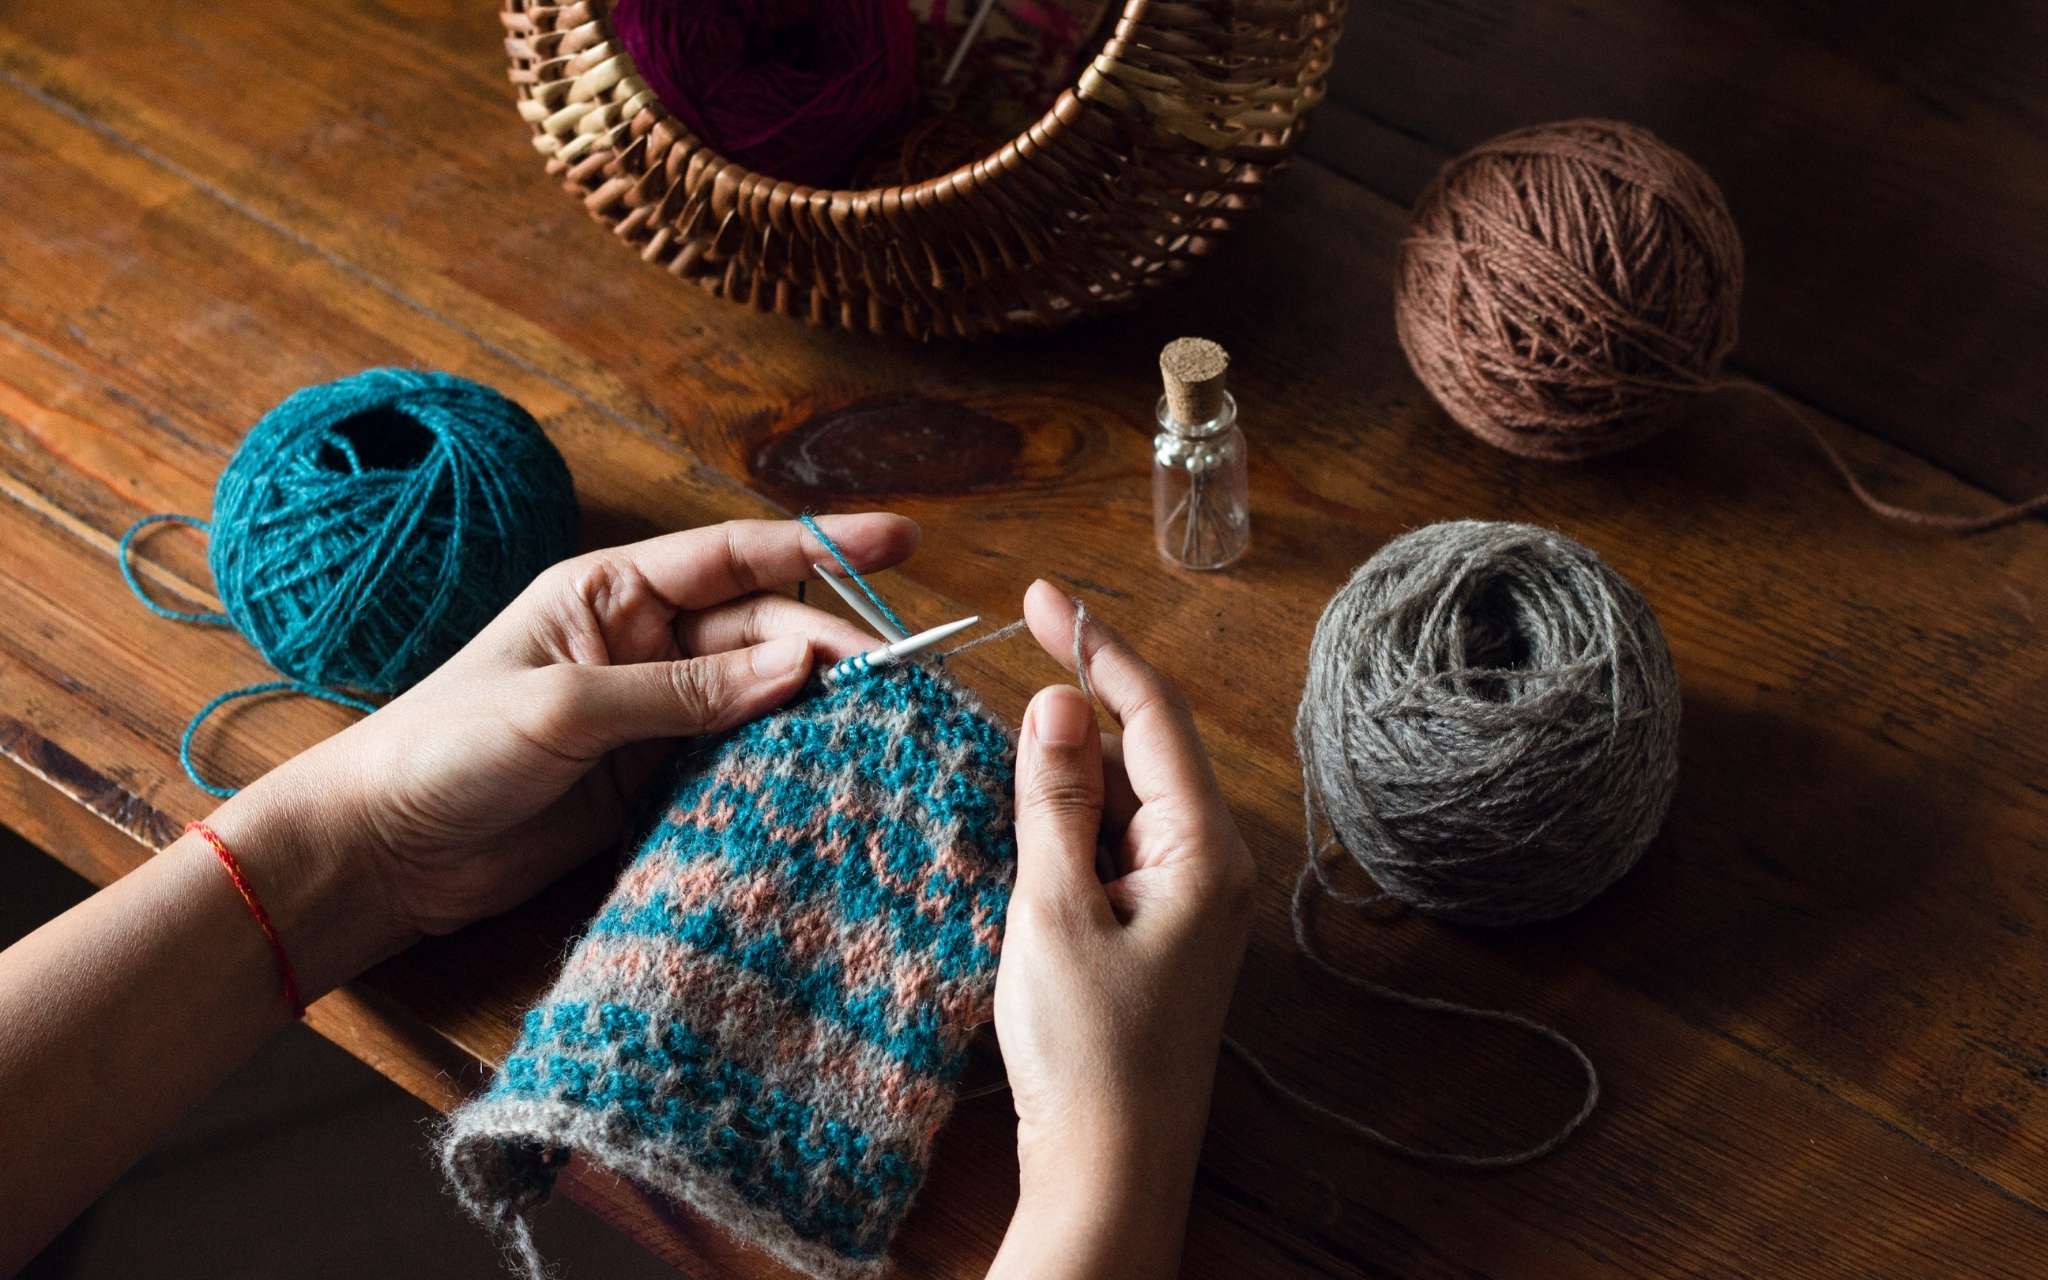 Hands knitting on a colourwork swatch in blue, coral and grey. The knitting is being held over a wooden table and there is a round wicker basket at the top of the photo and a bottle of pins.